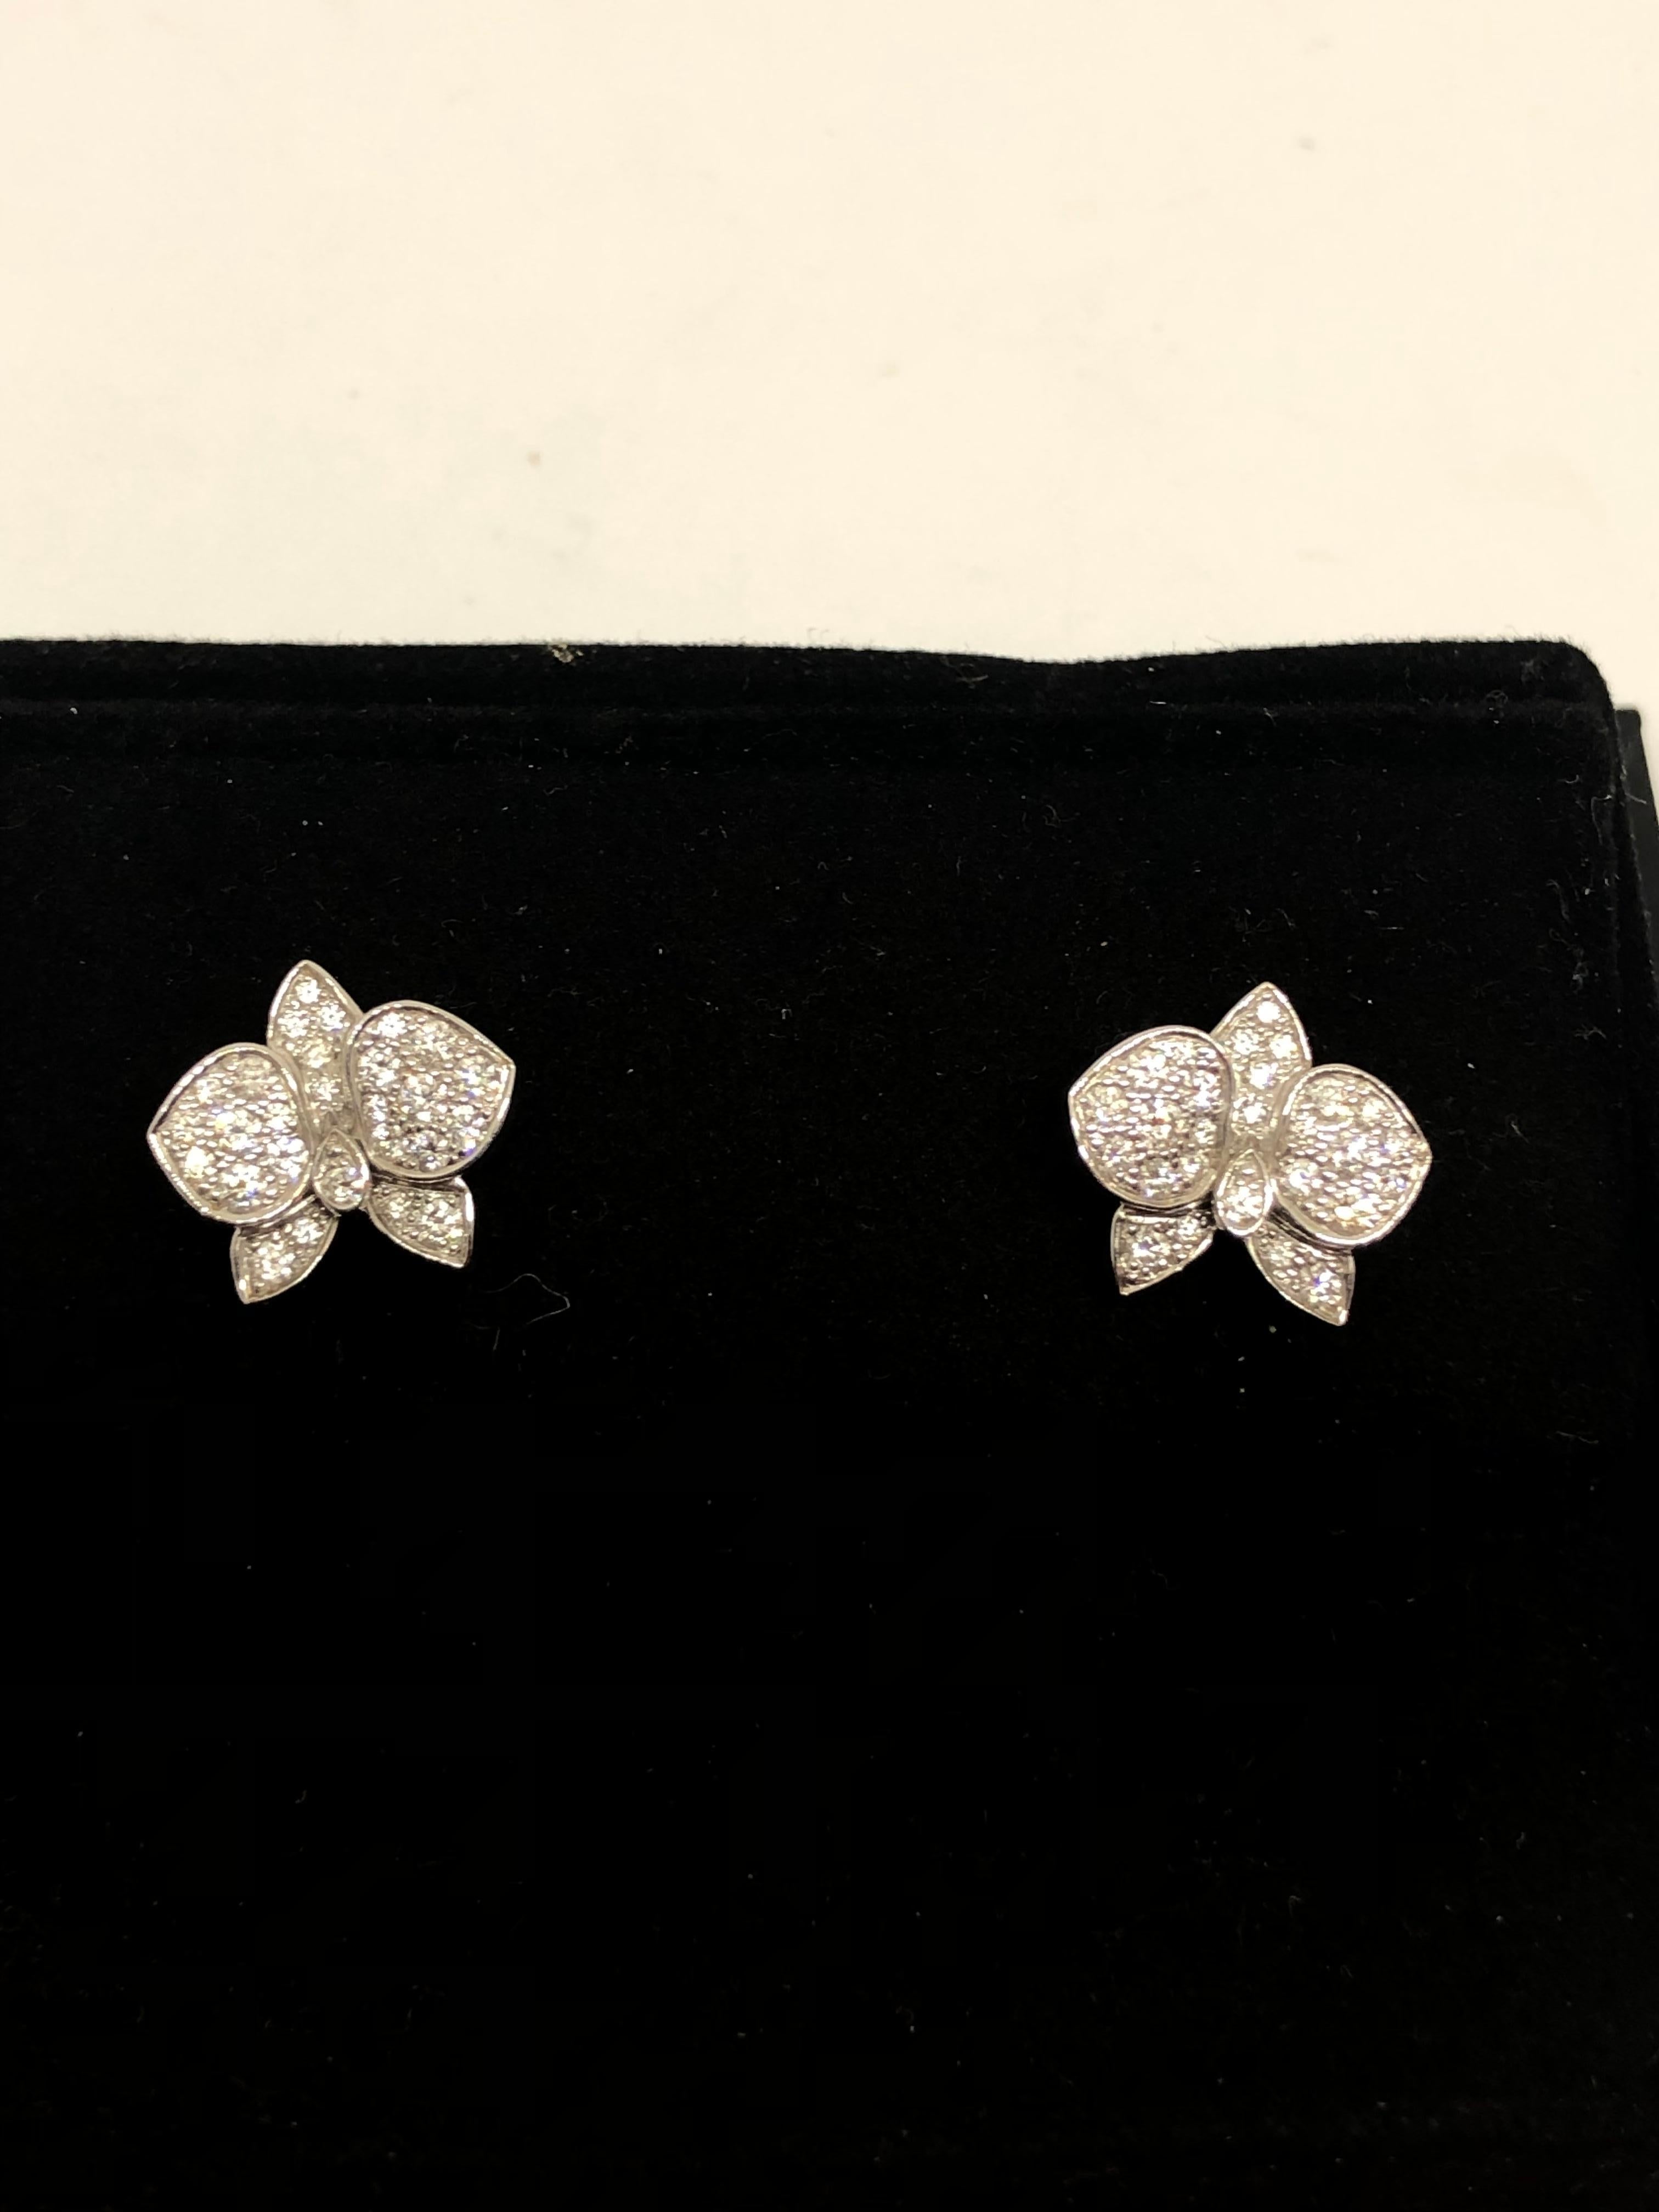 Pair of 18k white gold diamond earrings, crafted by Cartier for Caresse d’Orchidees Collection. Retail price $11100.
Earrings are 14mmx14mm
Weight: 4,9 grams.
Marked Cartier 